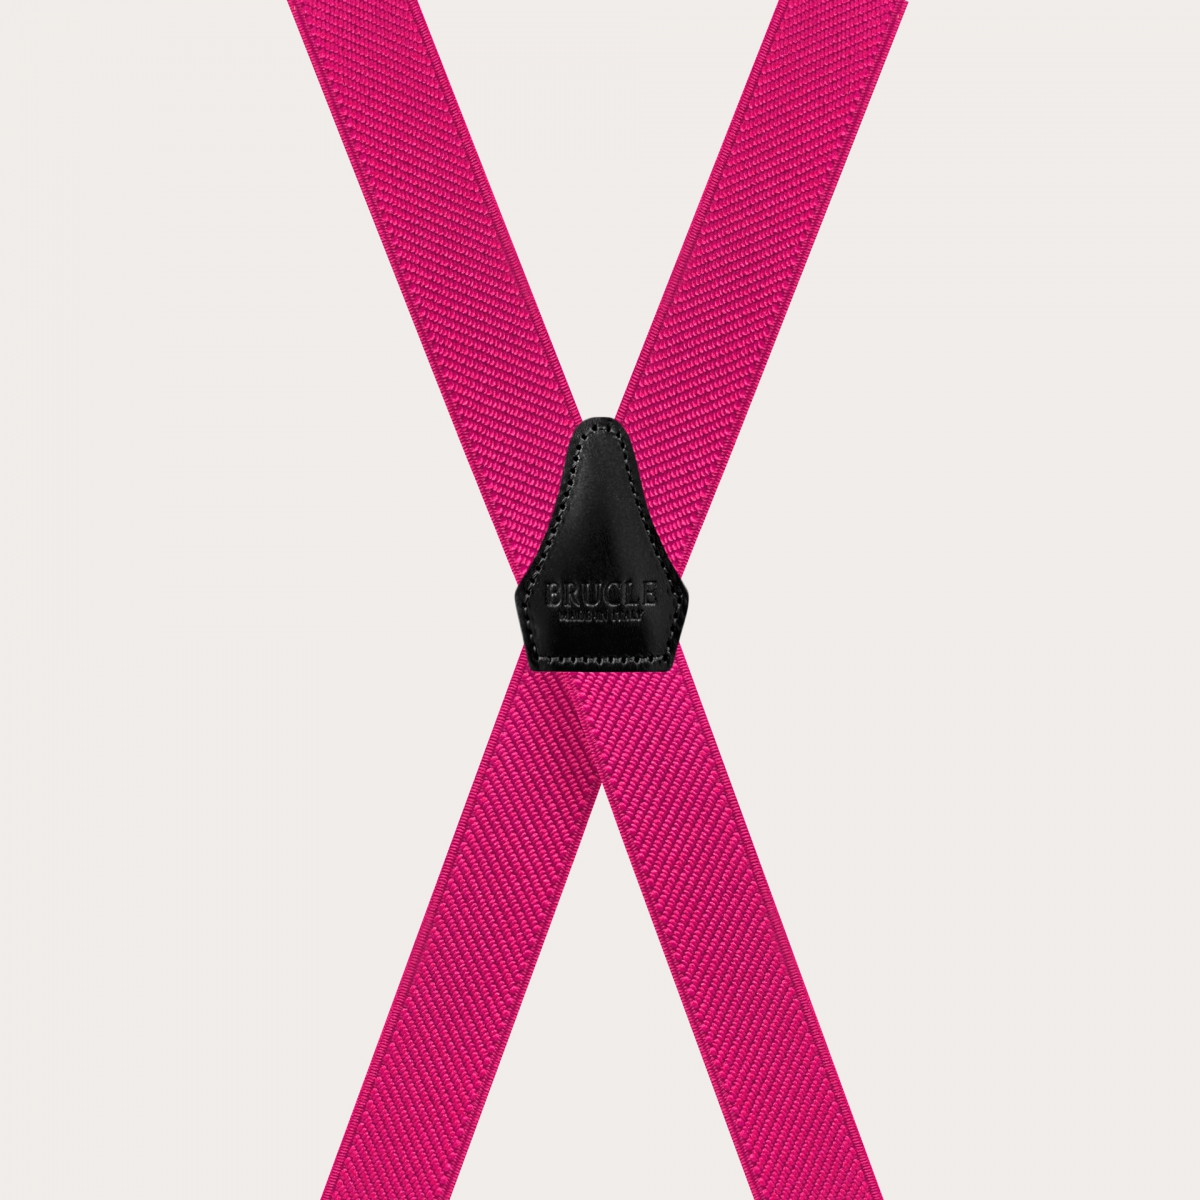 BRUCLE X-shaped fuchsia suspenders for men and women